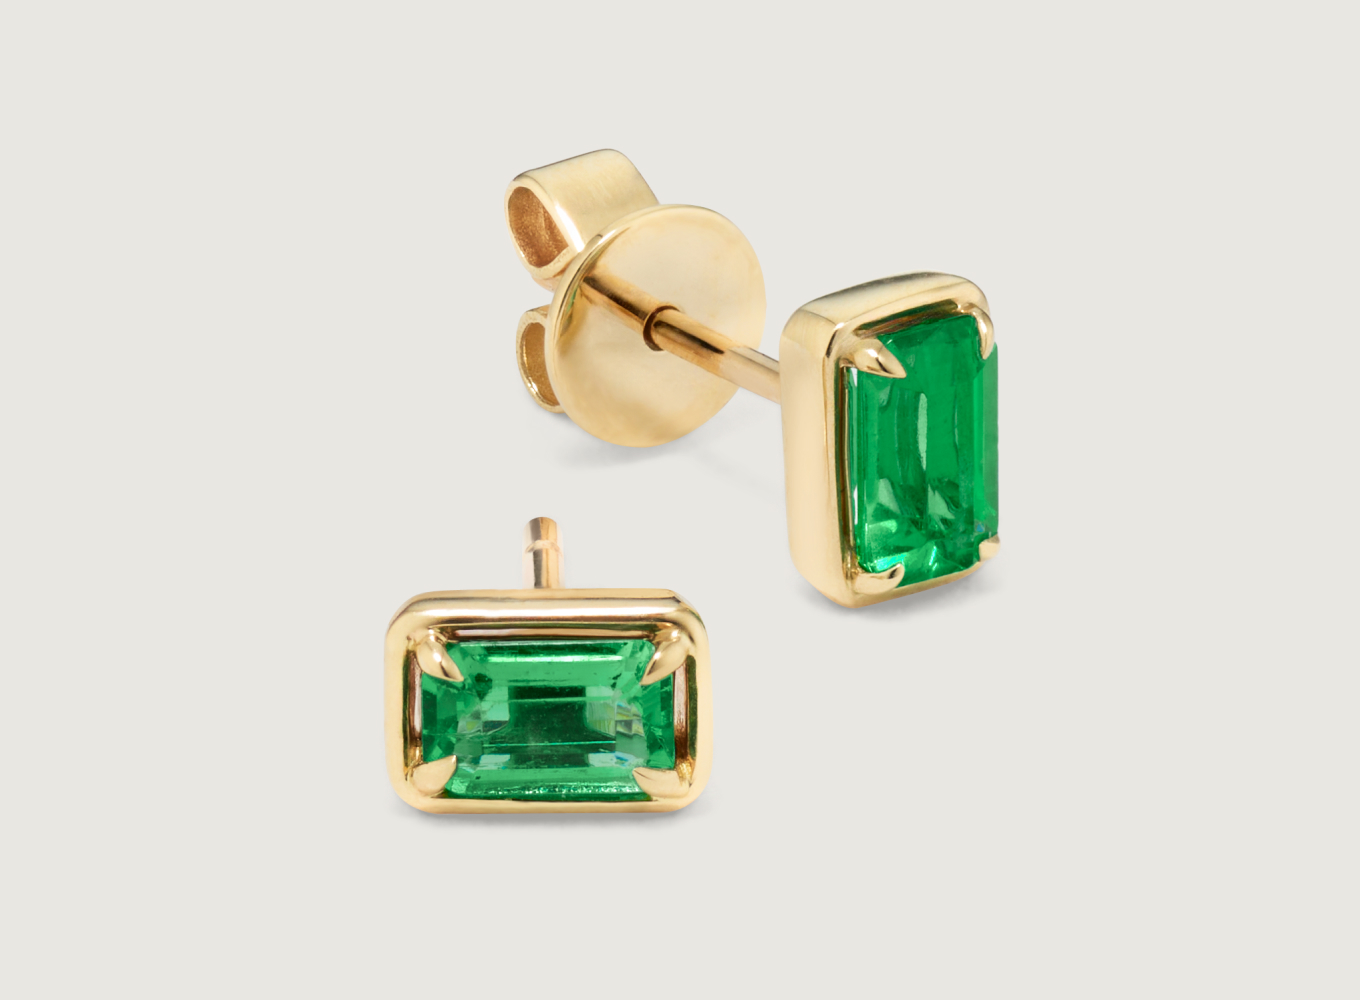 emerald stud earrings. Zelena Emerald Studs
Natural emeralds are the star of these beautiful earrings. A classic emerald cut showcases each emerald’s vibrant green color, while warm 14-karat yellow gold makes the perfect complement. A secure friction back offers worry-free wear. To care for natural emeralds, gently clean with mild soapy water and a soft cloth. Avoid harsh chemicals, ultrasonic jewelry cleaners, and extreme temperature changes.